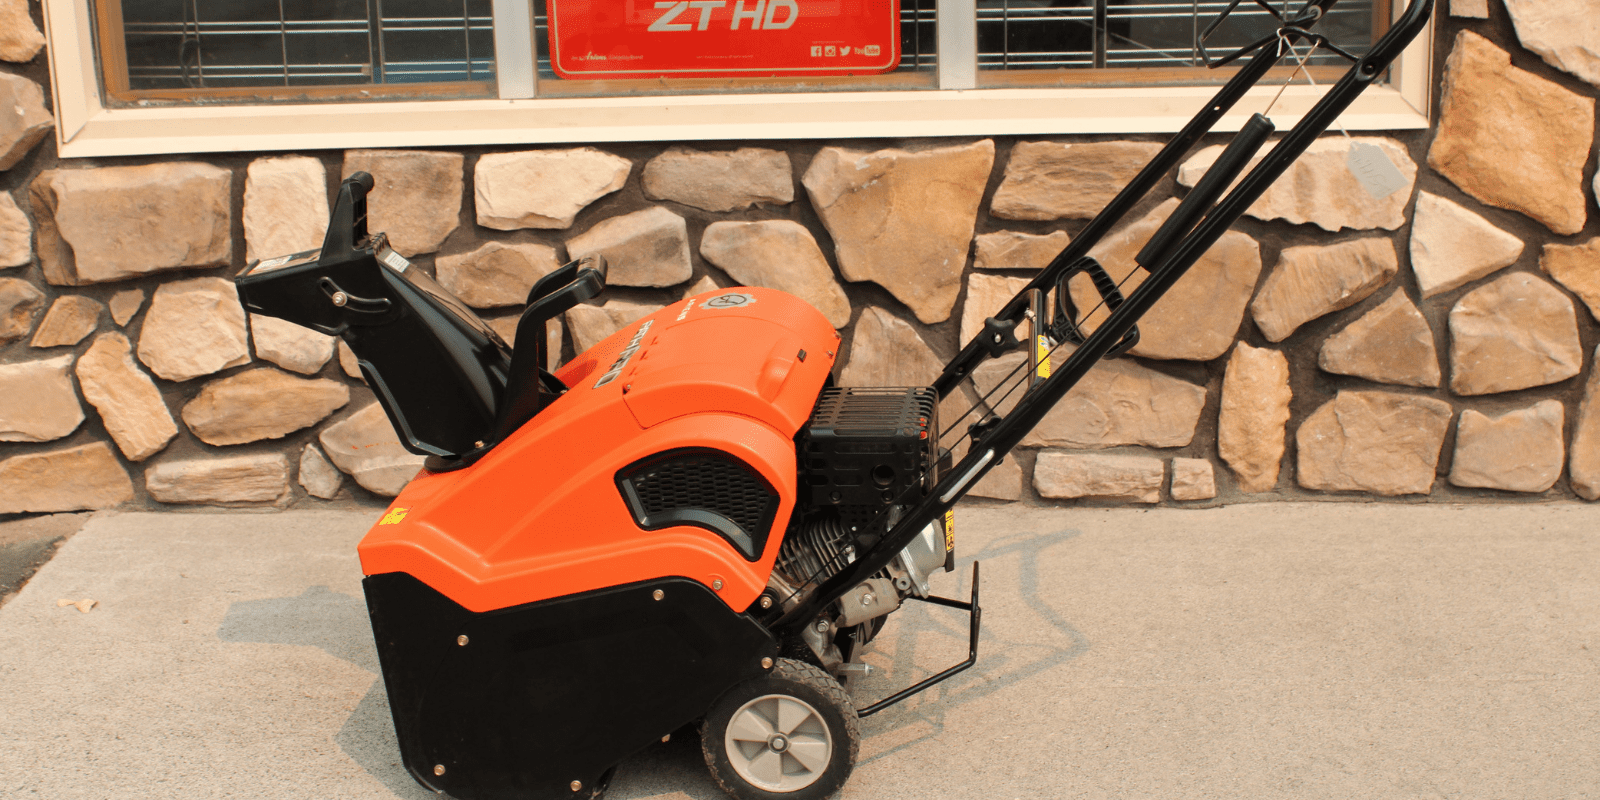 Best single-stage snow blowers on amazon